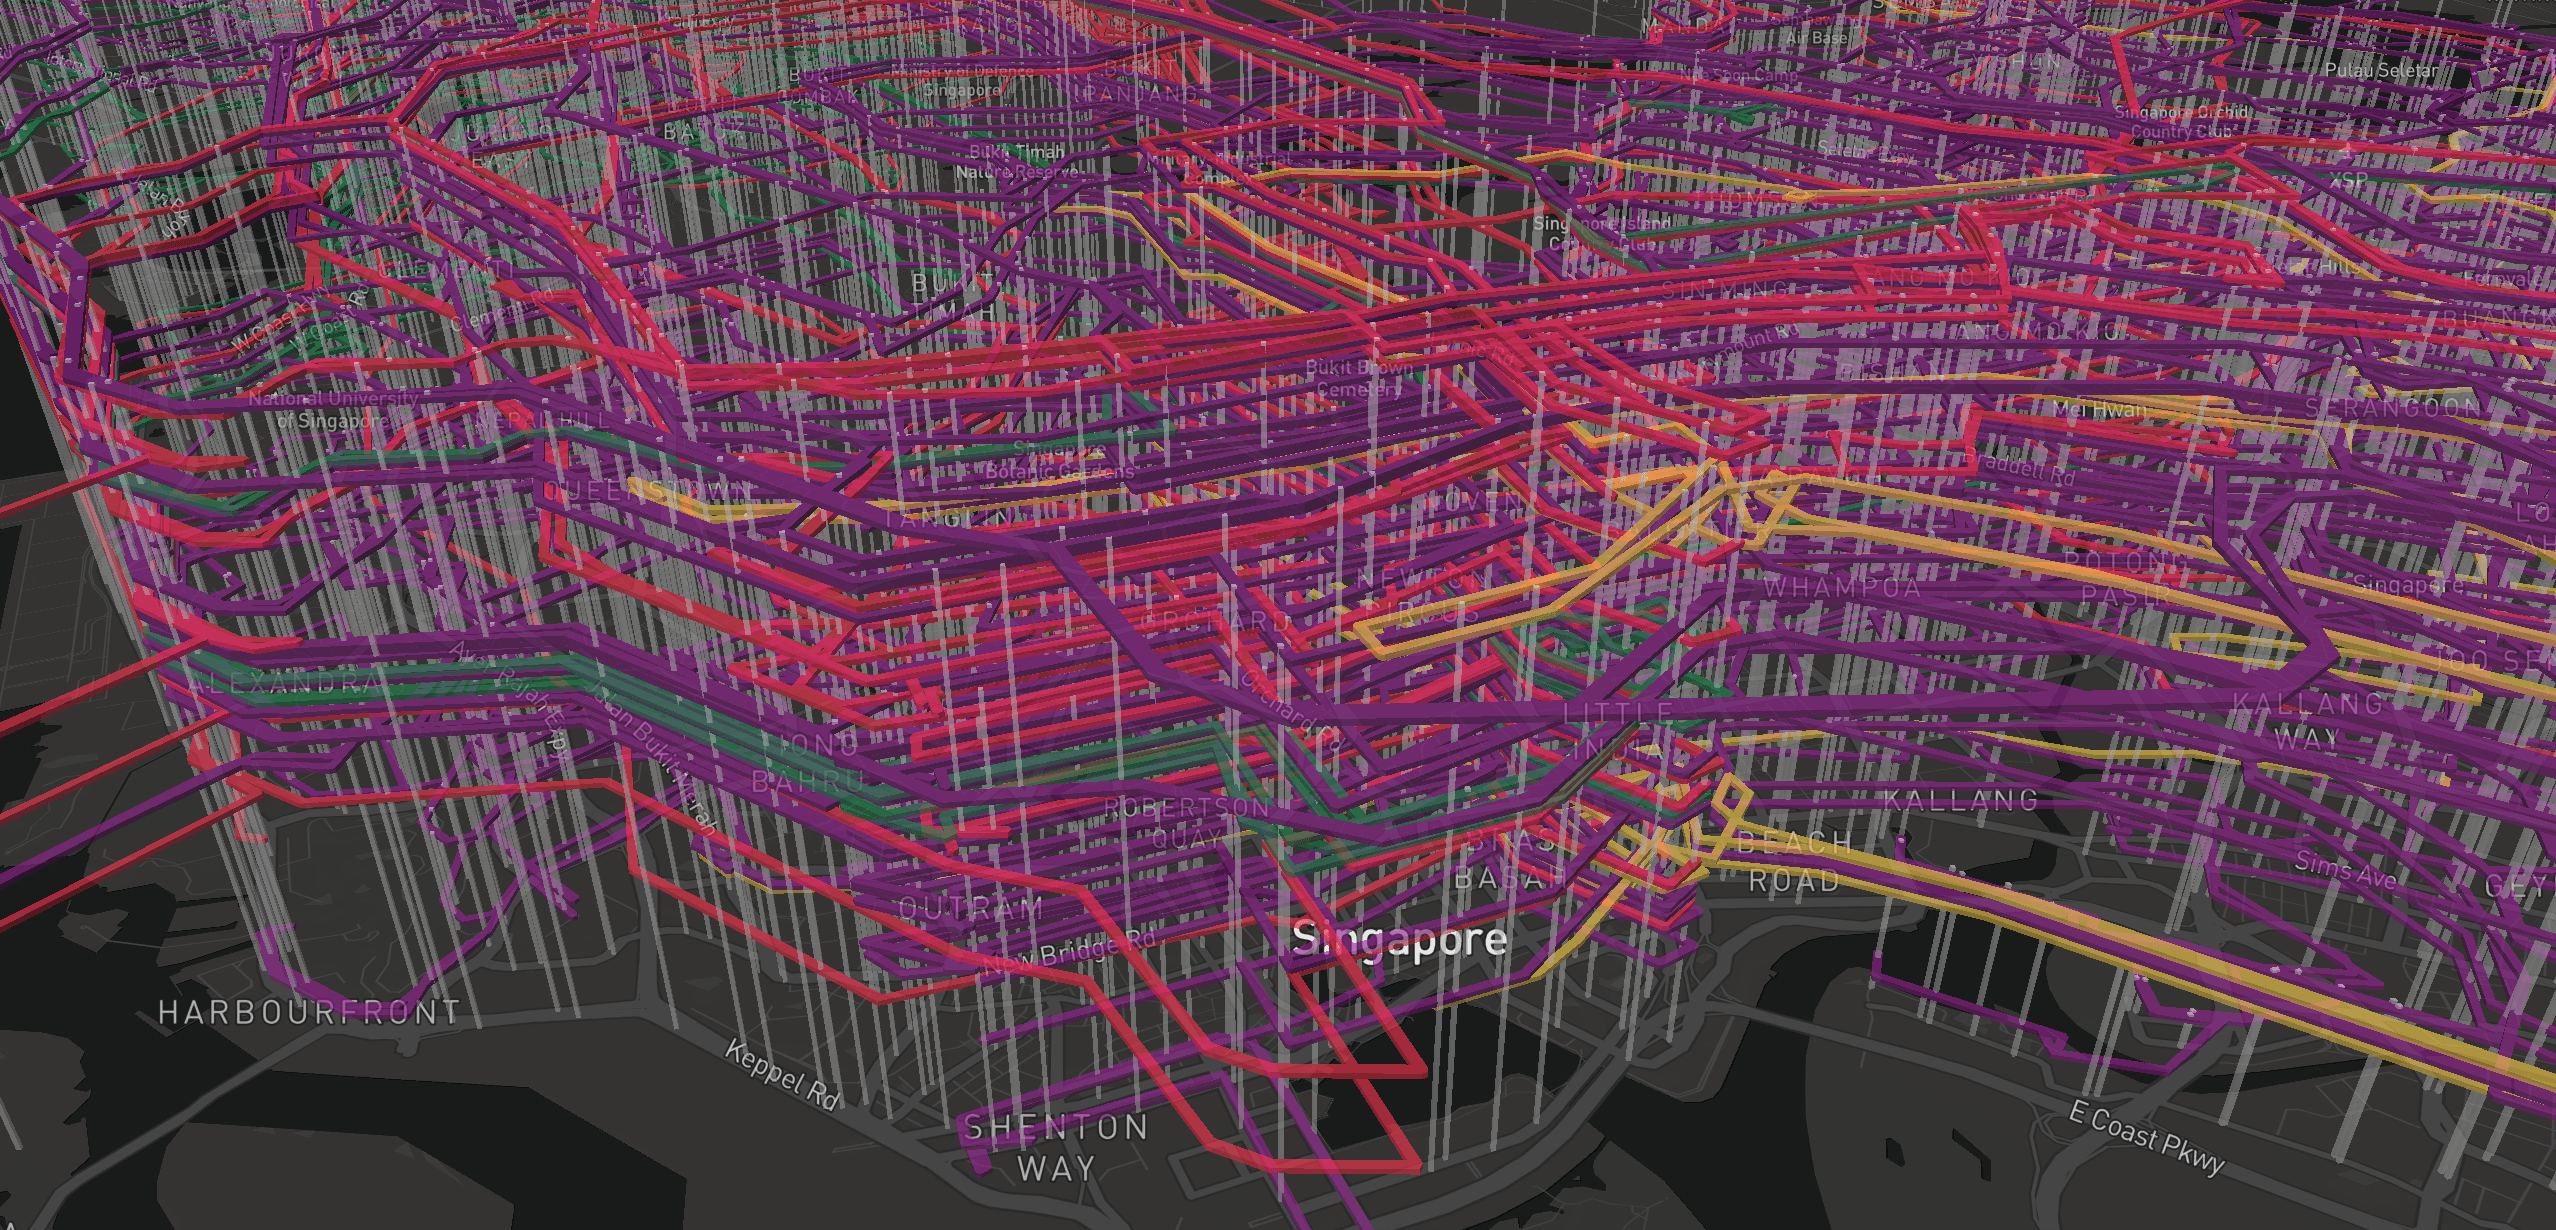 BusRouter SG visualization, with 3D extruded polygons for bus stops